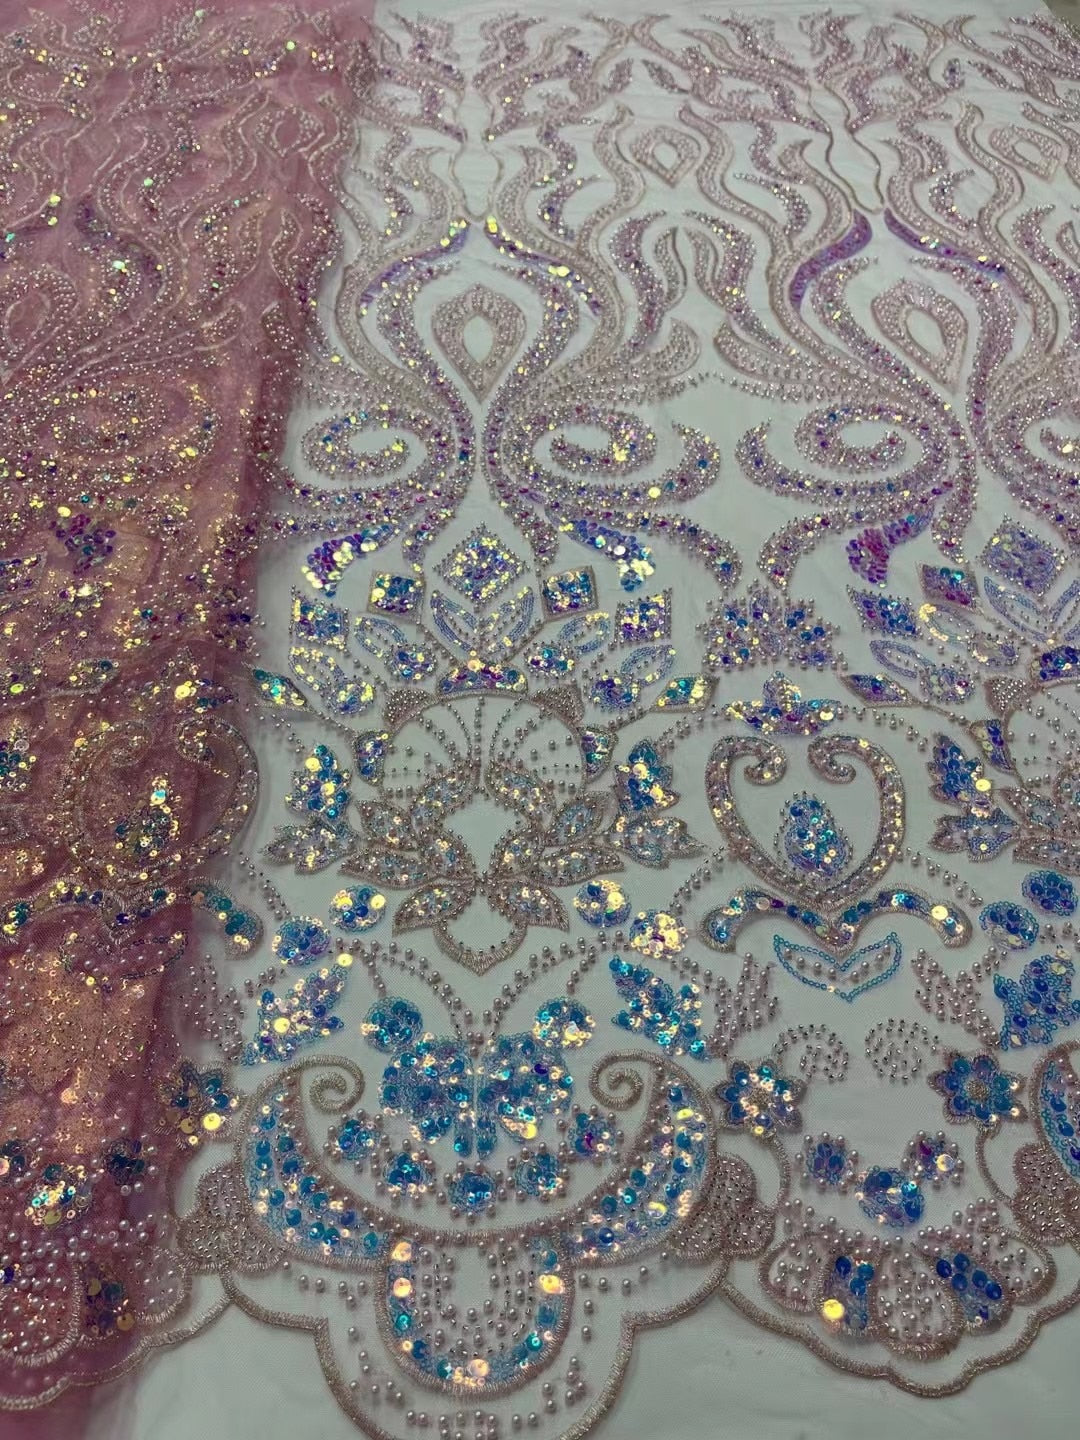 5 YARDS / 13 COLORS / Isaac Sequin Beaded Embroidery Glitter Mesh Sparkly Lace Wedding Party Dress Fabric